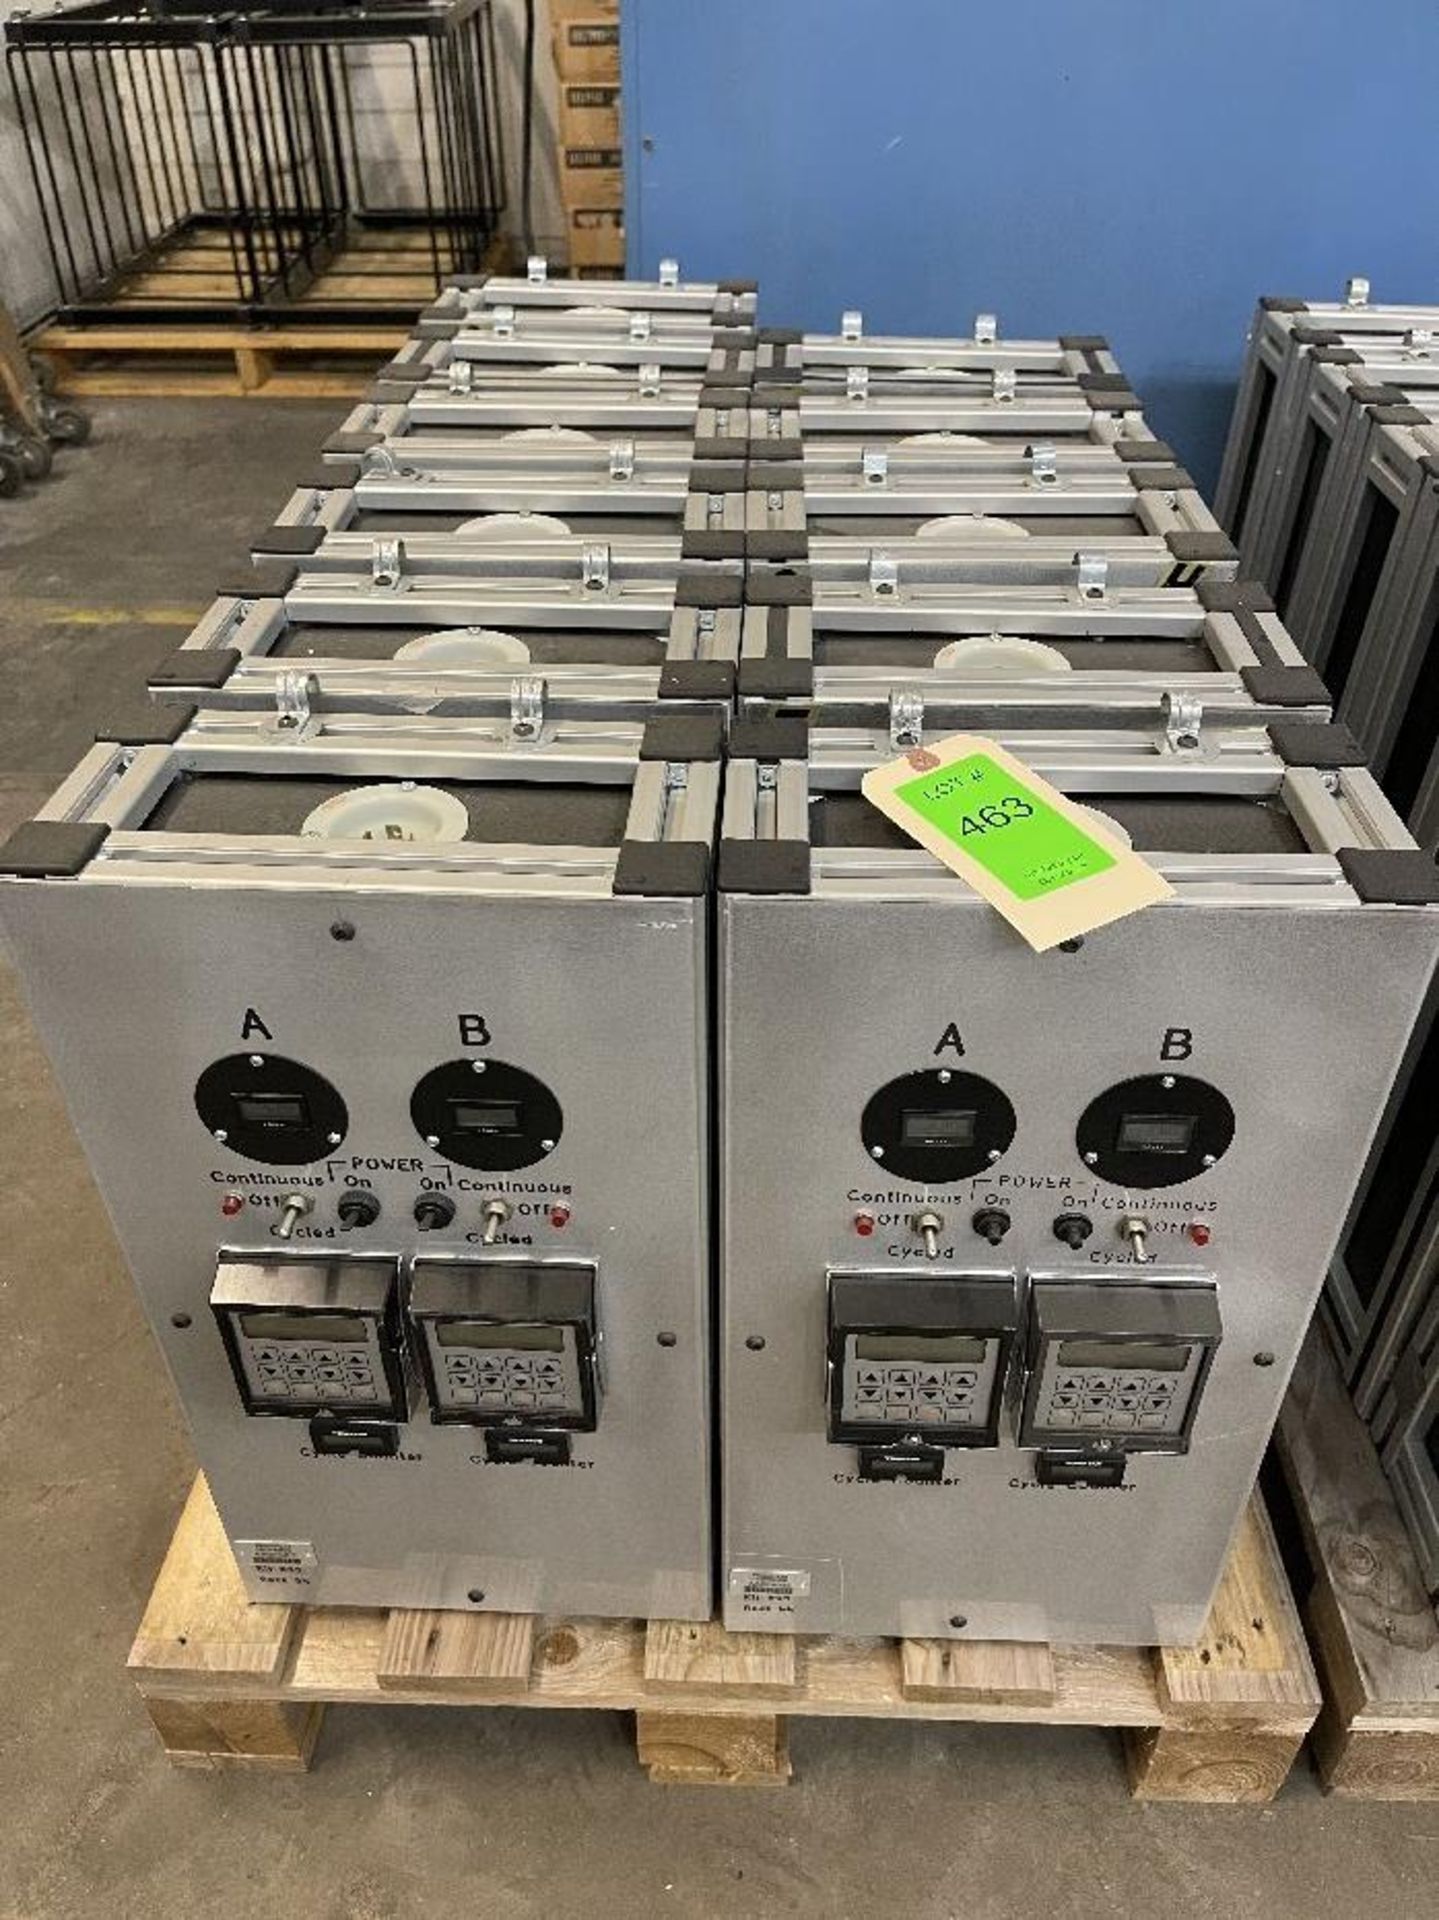 Duplex Cycle Counter Units in Aluminum Extrusion Cases